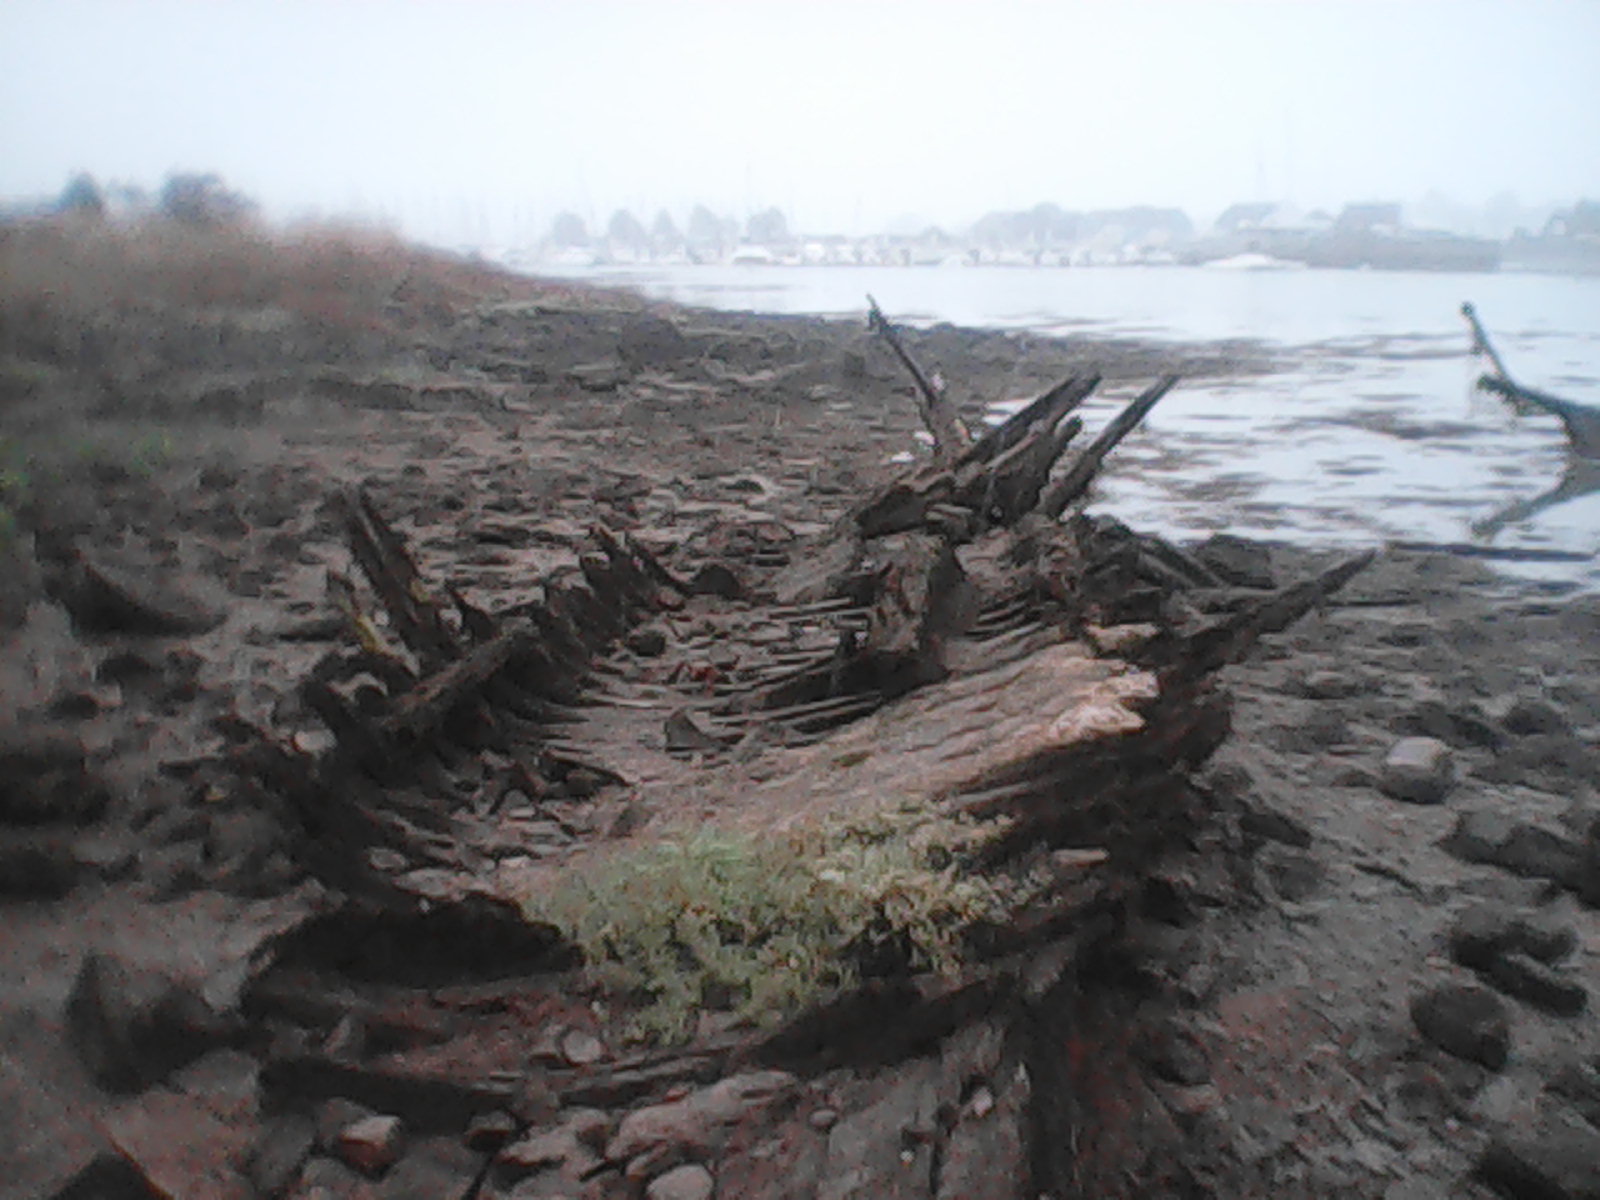 A rotten wreck, sunken into the sand on a grey and foggy beach.